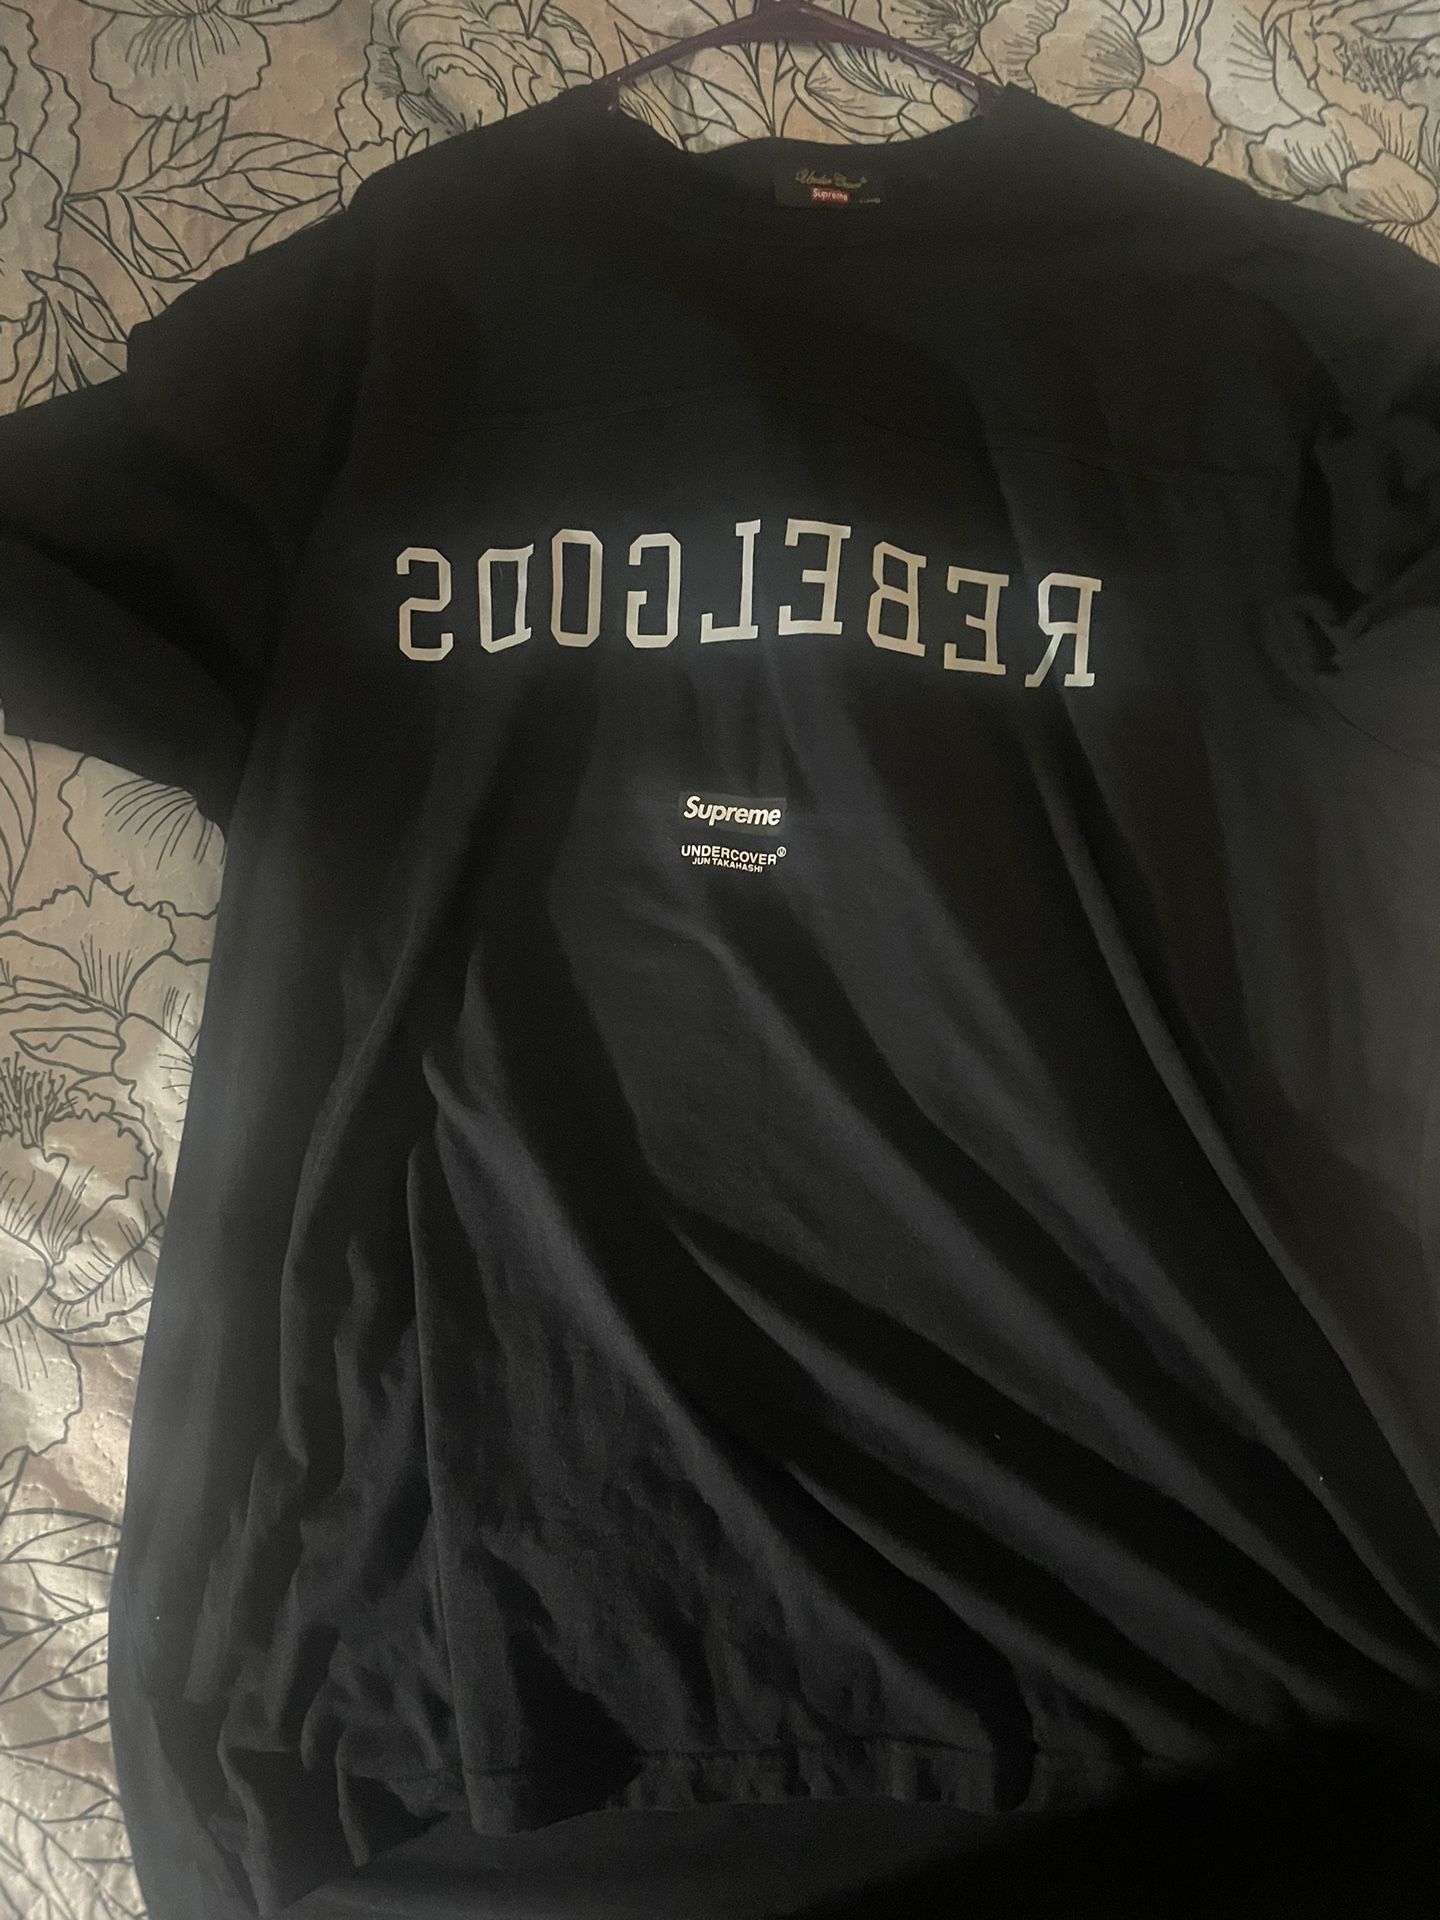 Supreme UNDERCOVER Football Top